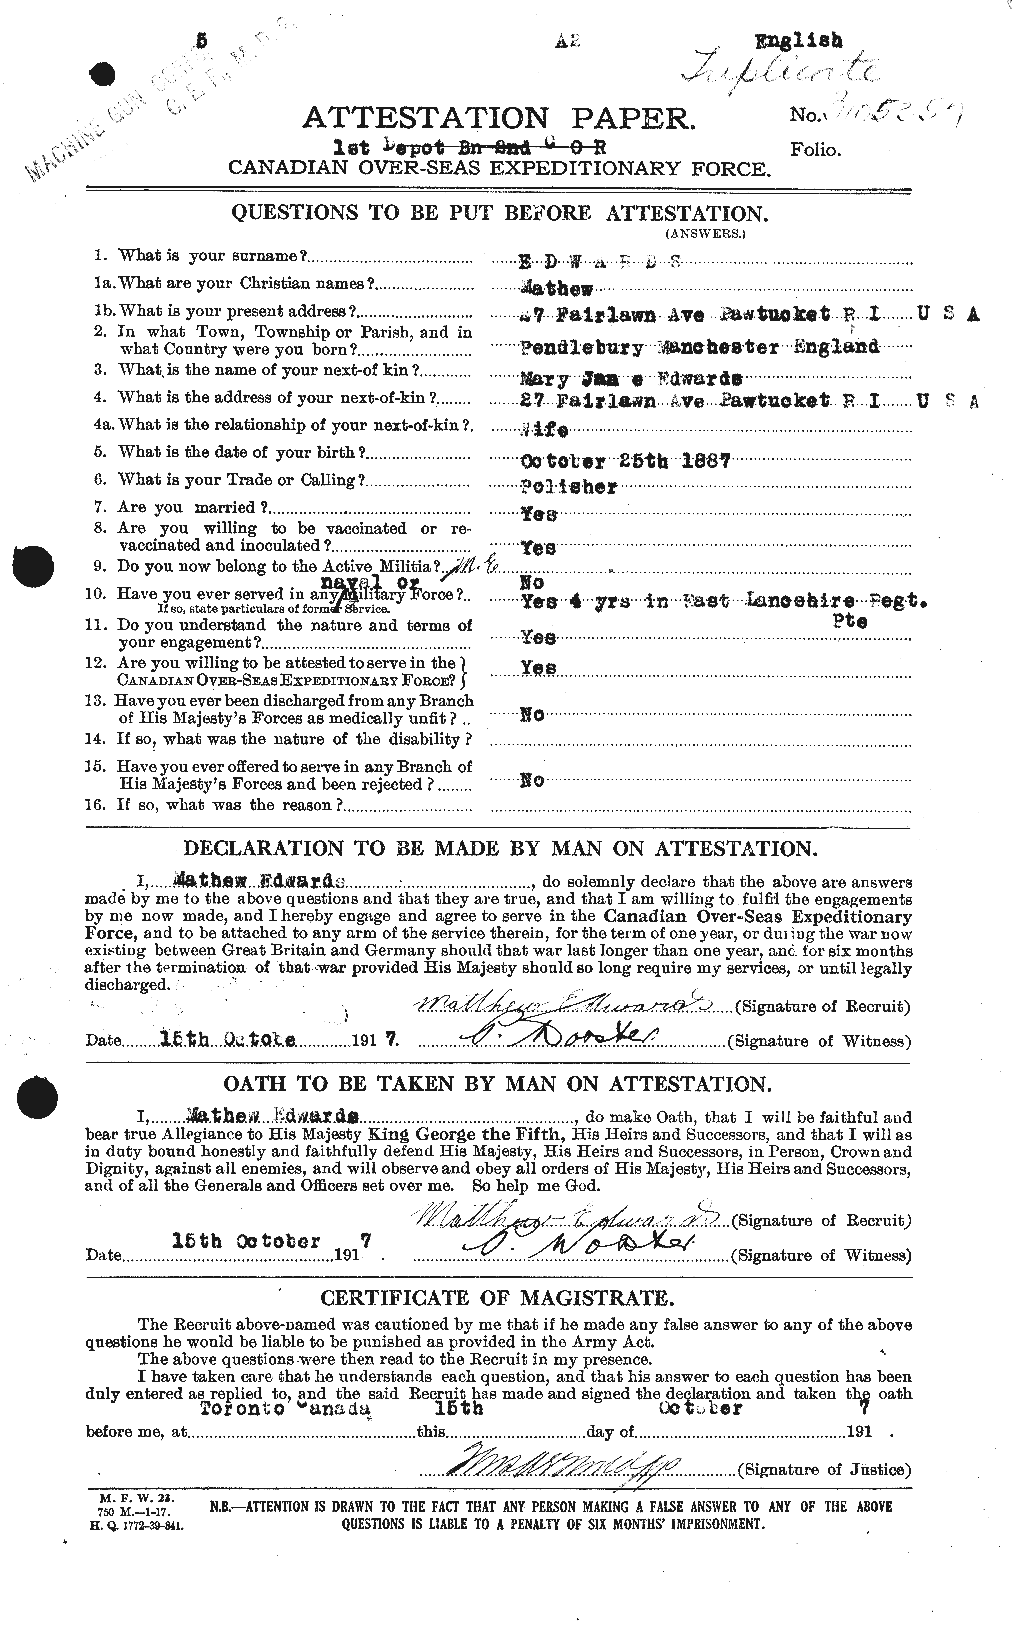 Personnel Records of the First World War - CEF 310211a